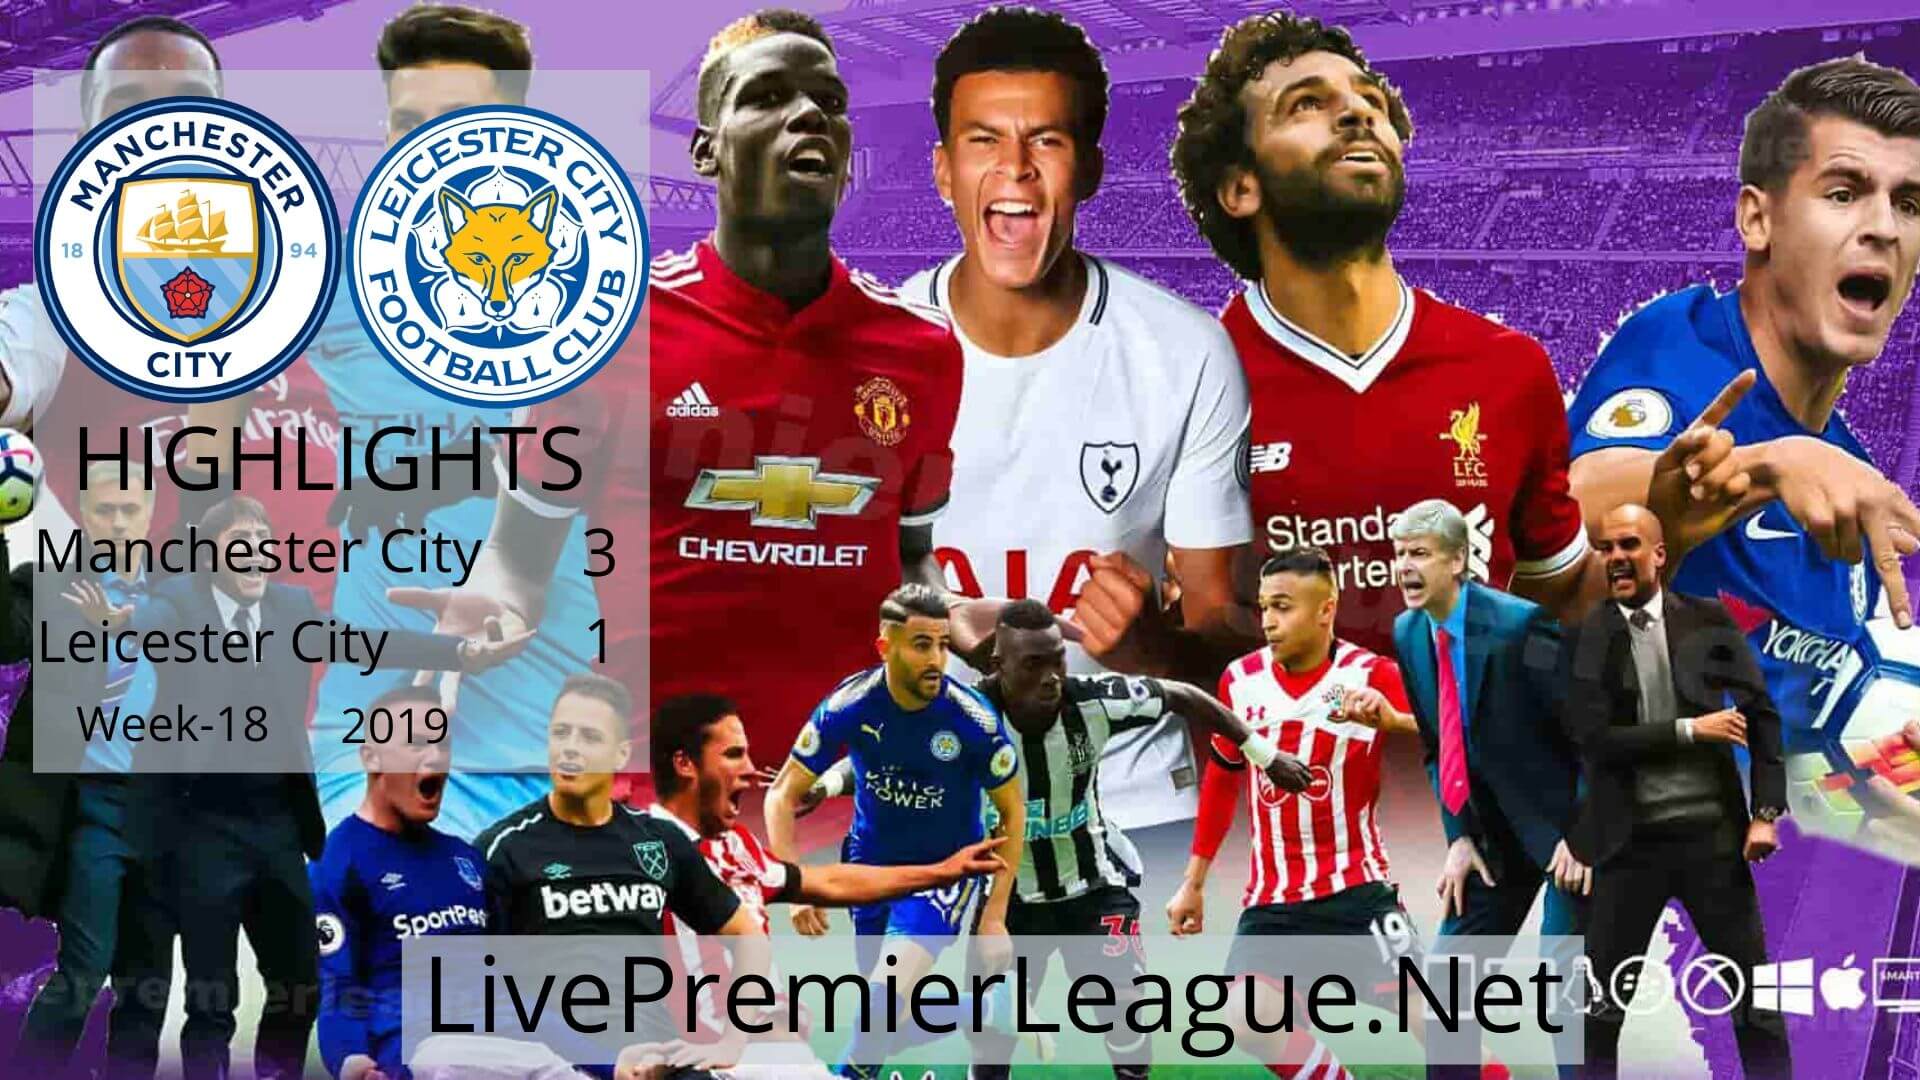 Manchester City Vs Leicester City Highlights 2019 Week 18